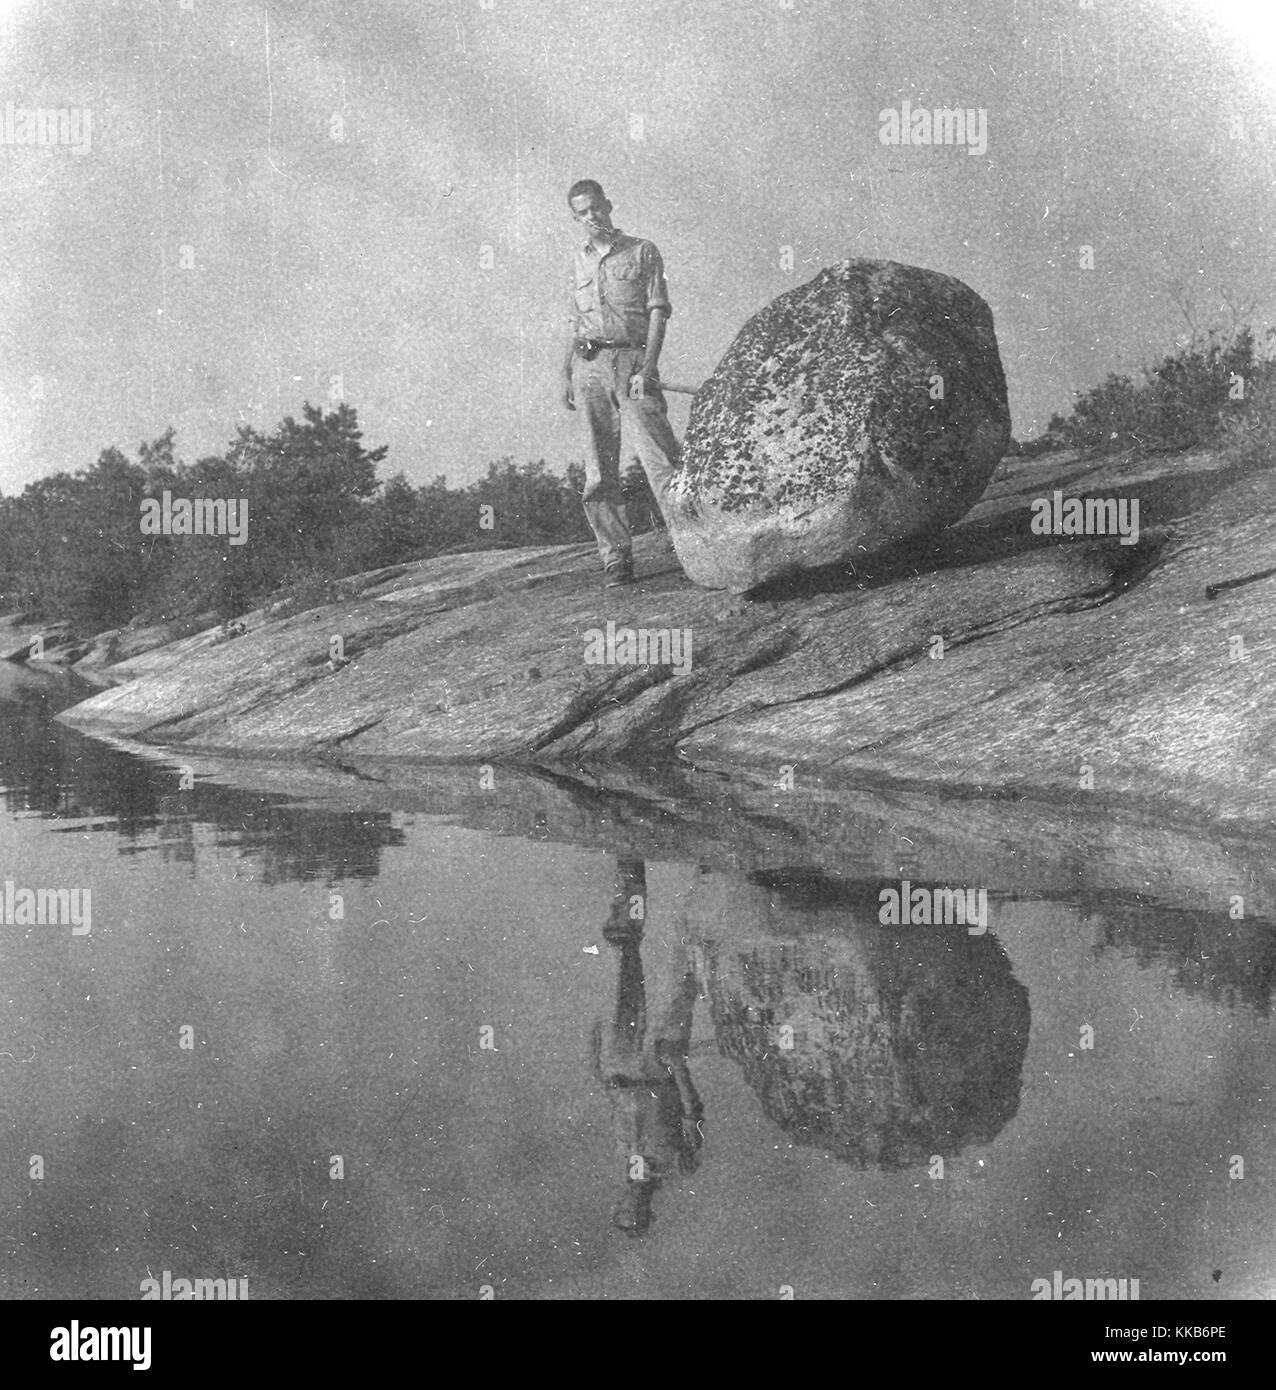 USGS field assistant Robin C. Lease posing with a glacial boulder made of Hope Valley Alaskite Gneiss, Hopkinton, Rhode Island. Image courtesy T.G. Feininger/USGS. July 13, 1962. Stock Photo